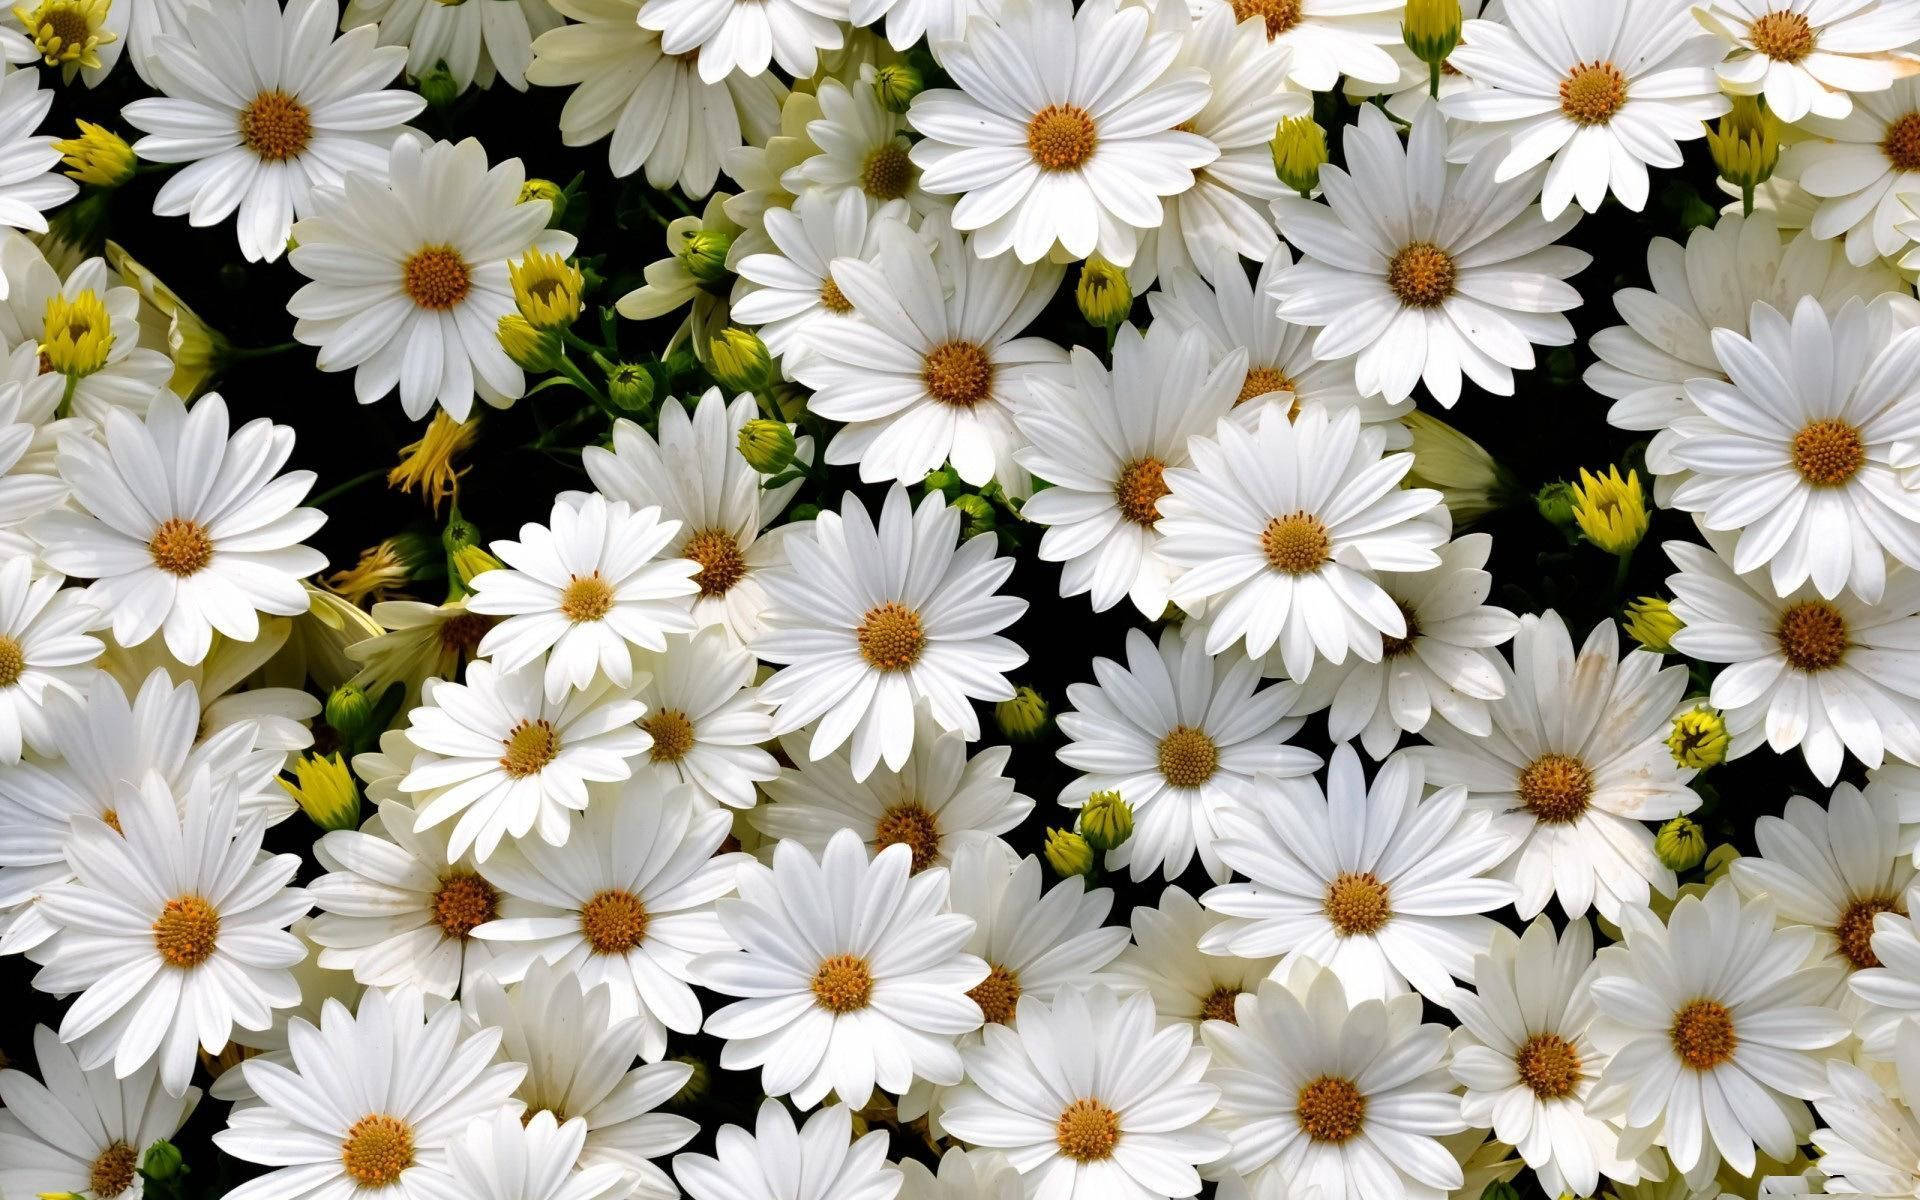 "Ethereal Beauty of a Blooming White Marguerite Daisy" Wallpaper